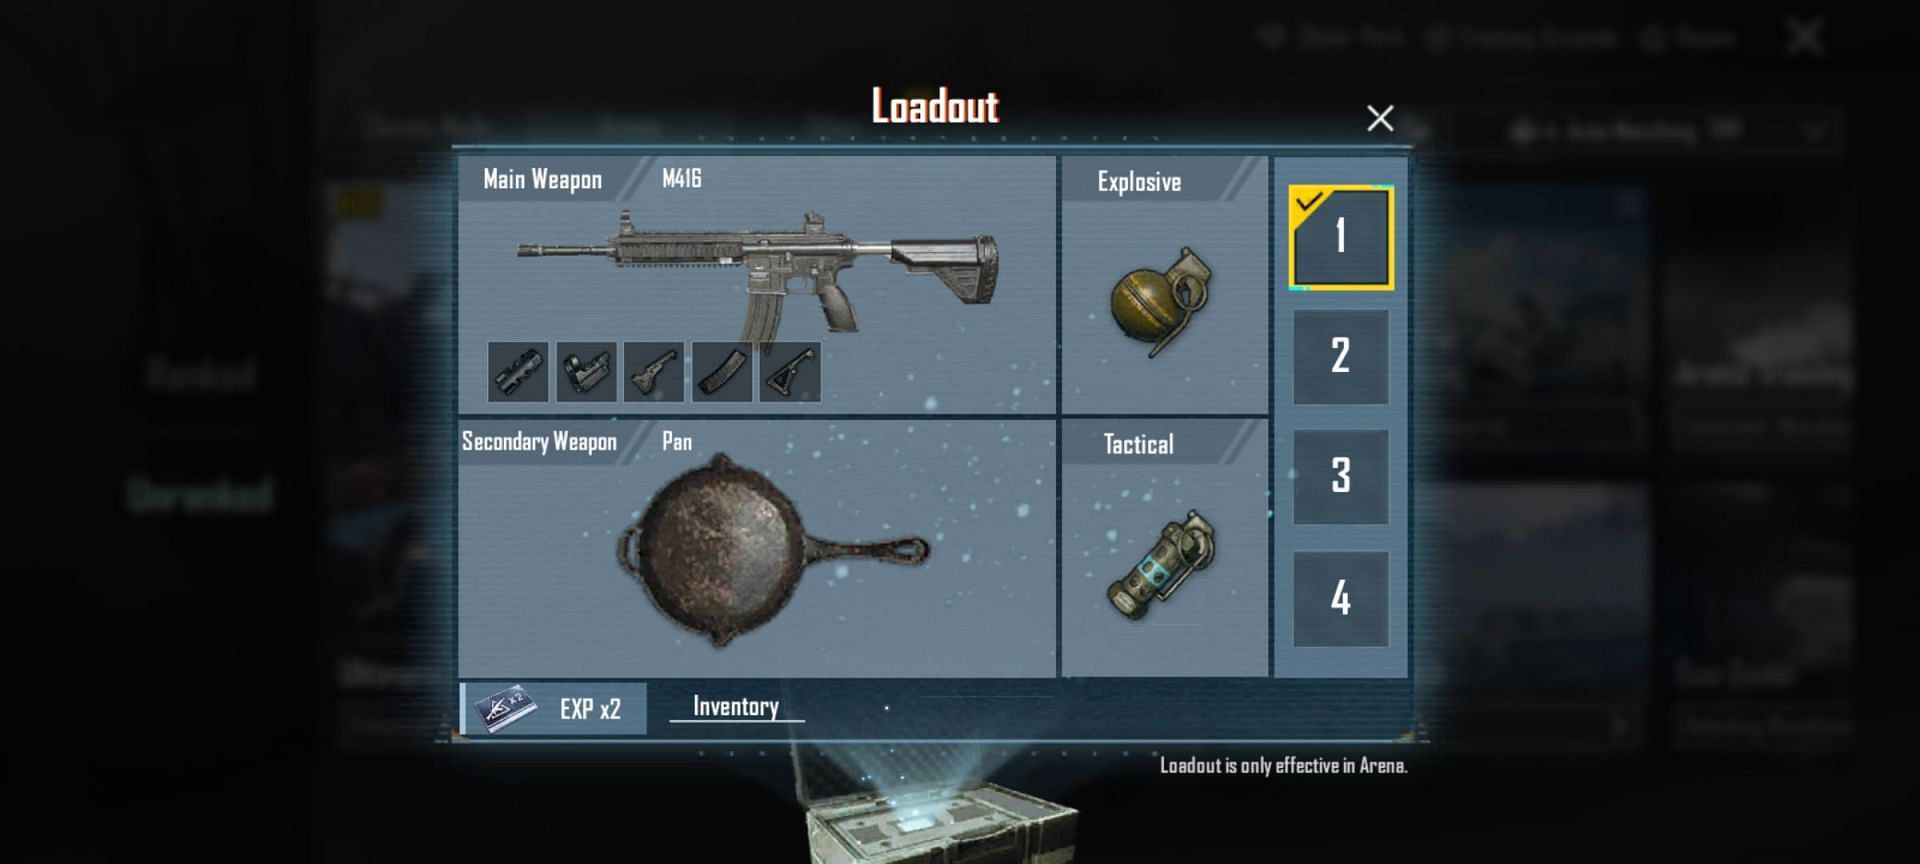 M416 is one of the best options to opt for as a loadout in Arena mode (Image via Krafton)